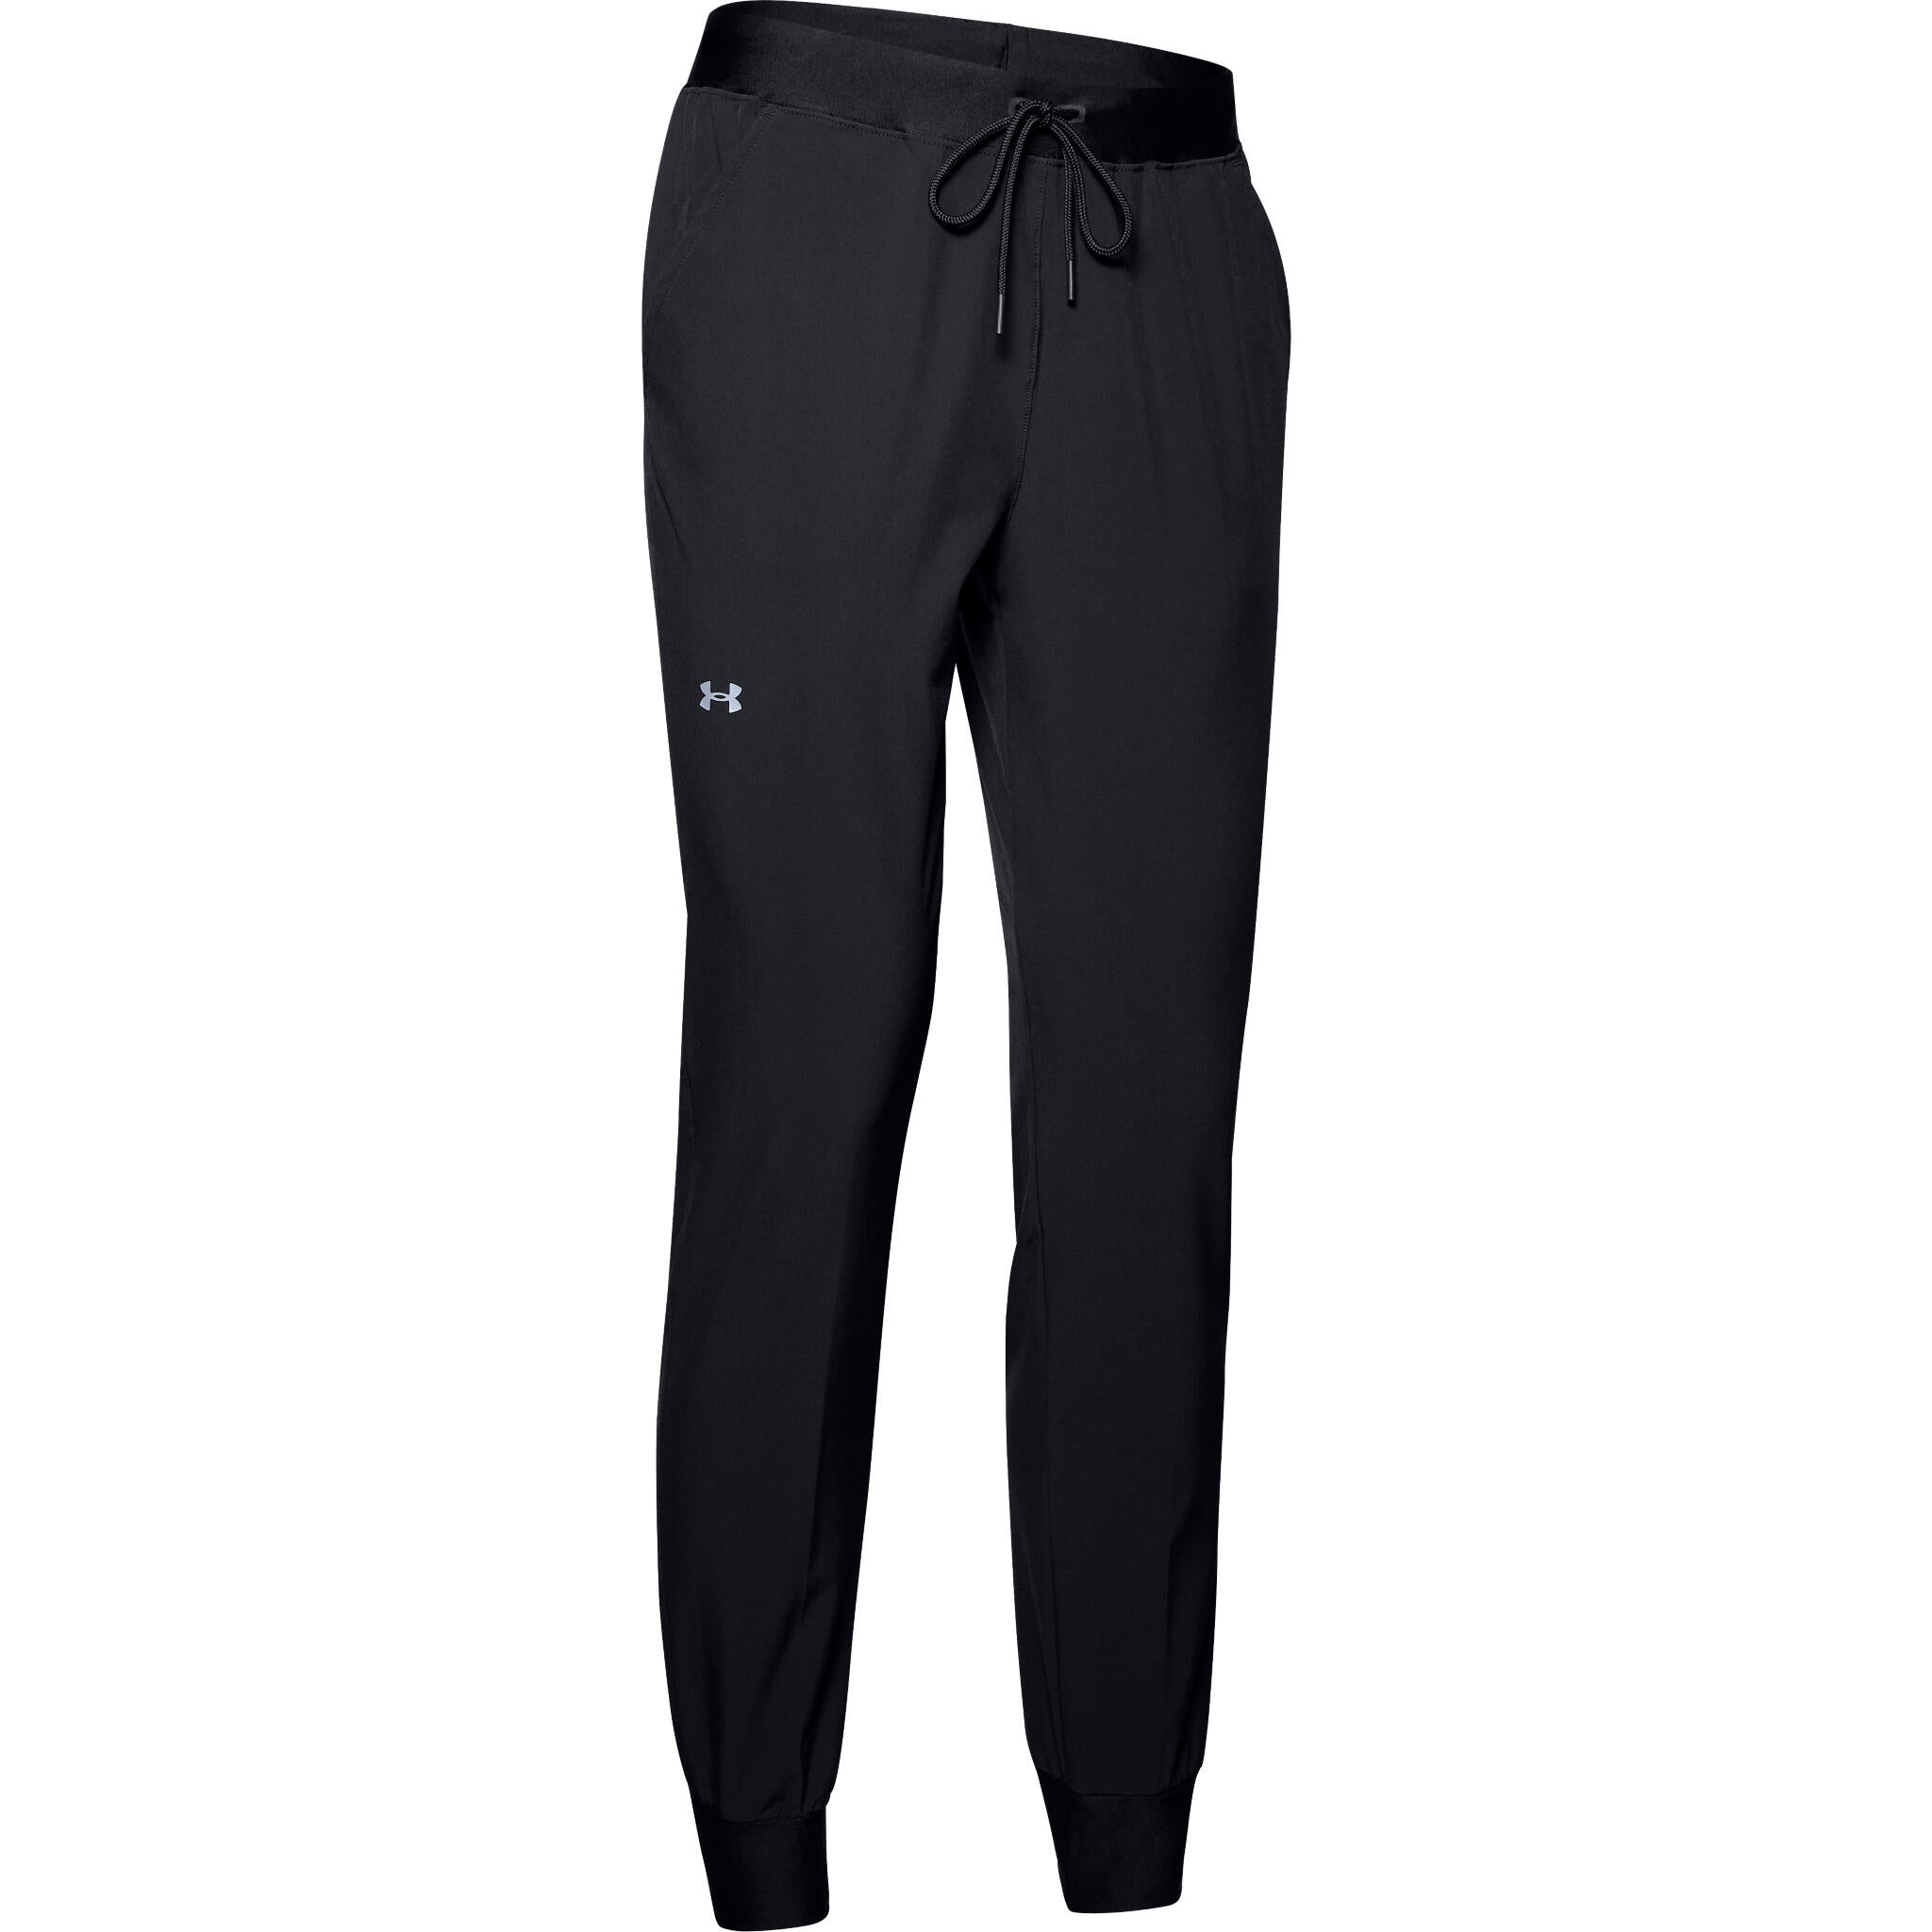 Under Armour Sport Woven W special offer